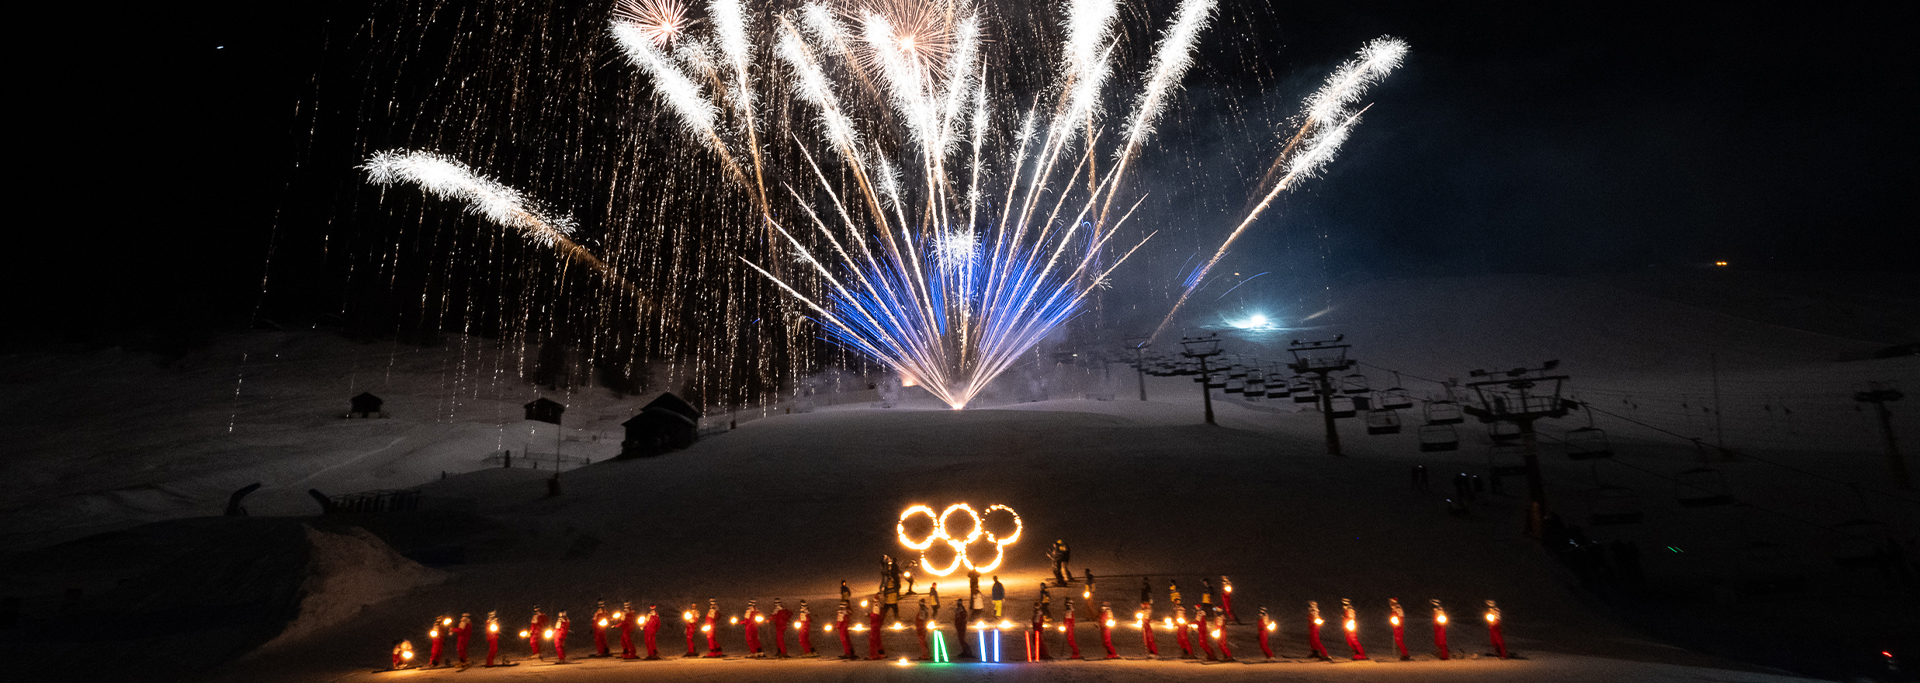 LIVIGNO AND ITS COUNTDOWN: 2 YEARS TO THE START OF THE GAMES